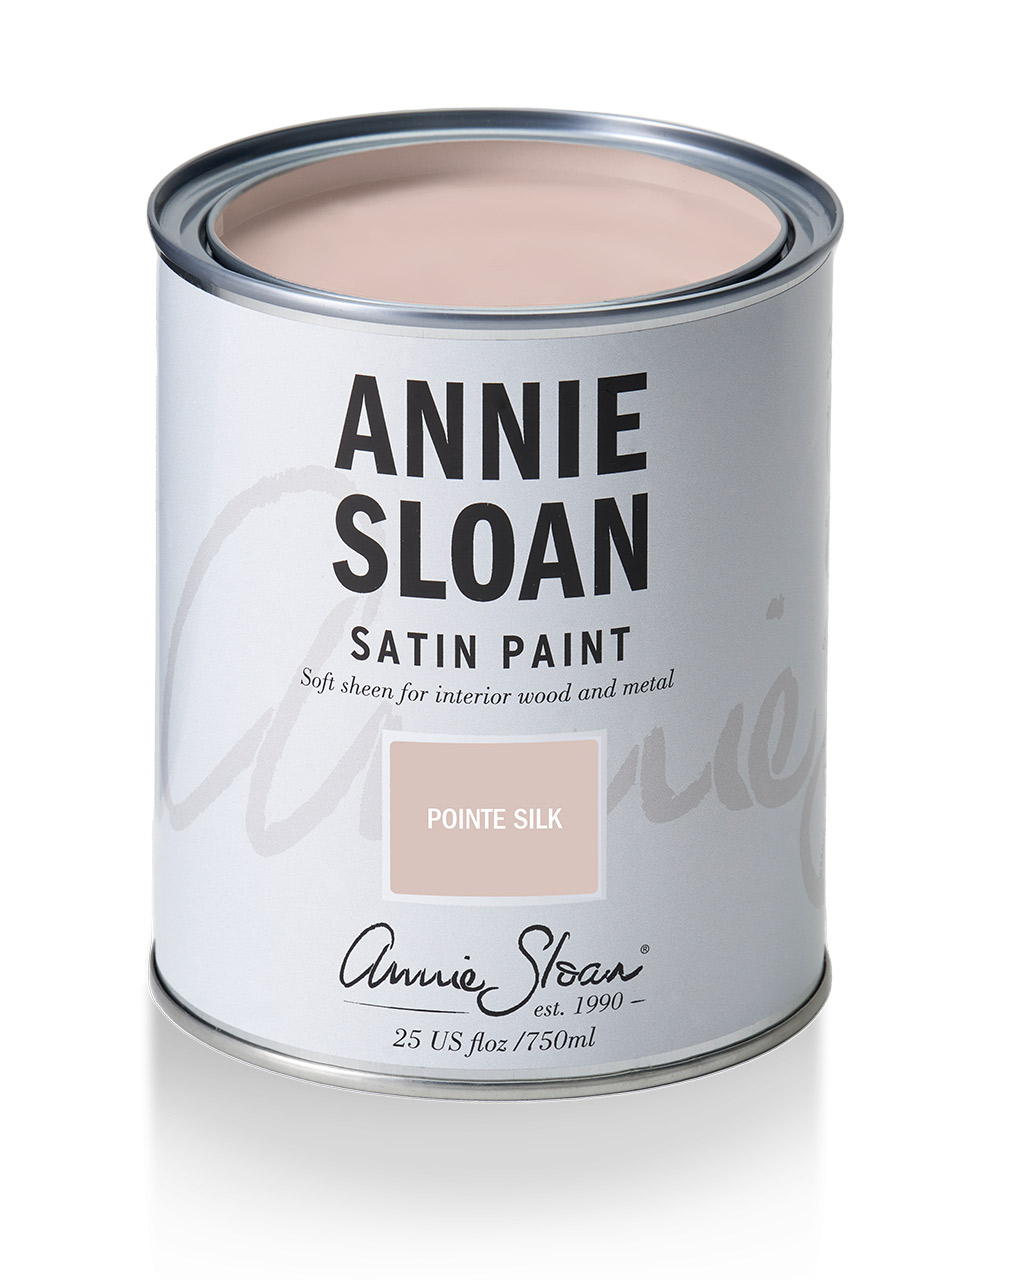 Product shot of Annie Sloan Satin Paint tin in Pointe Silk